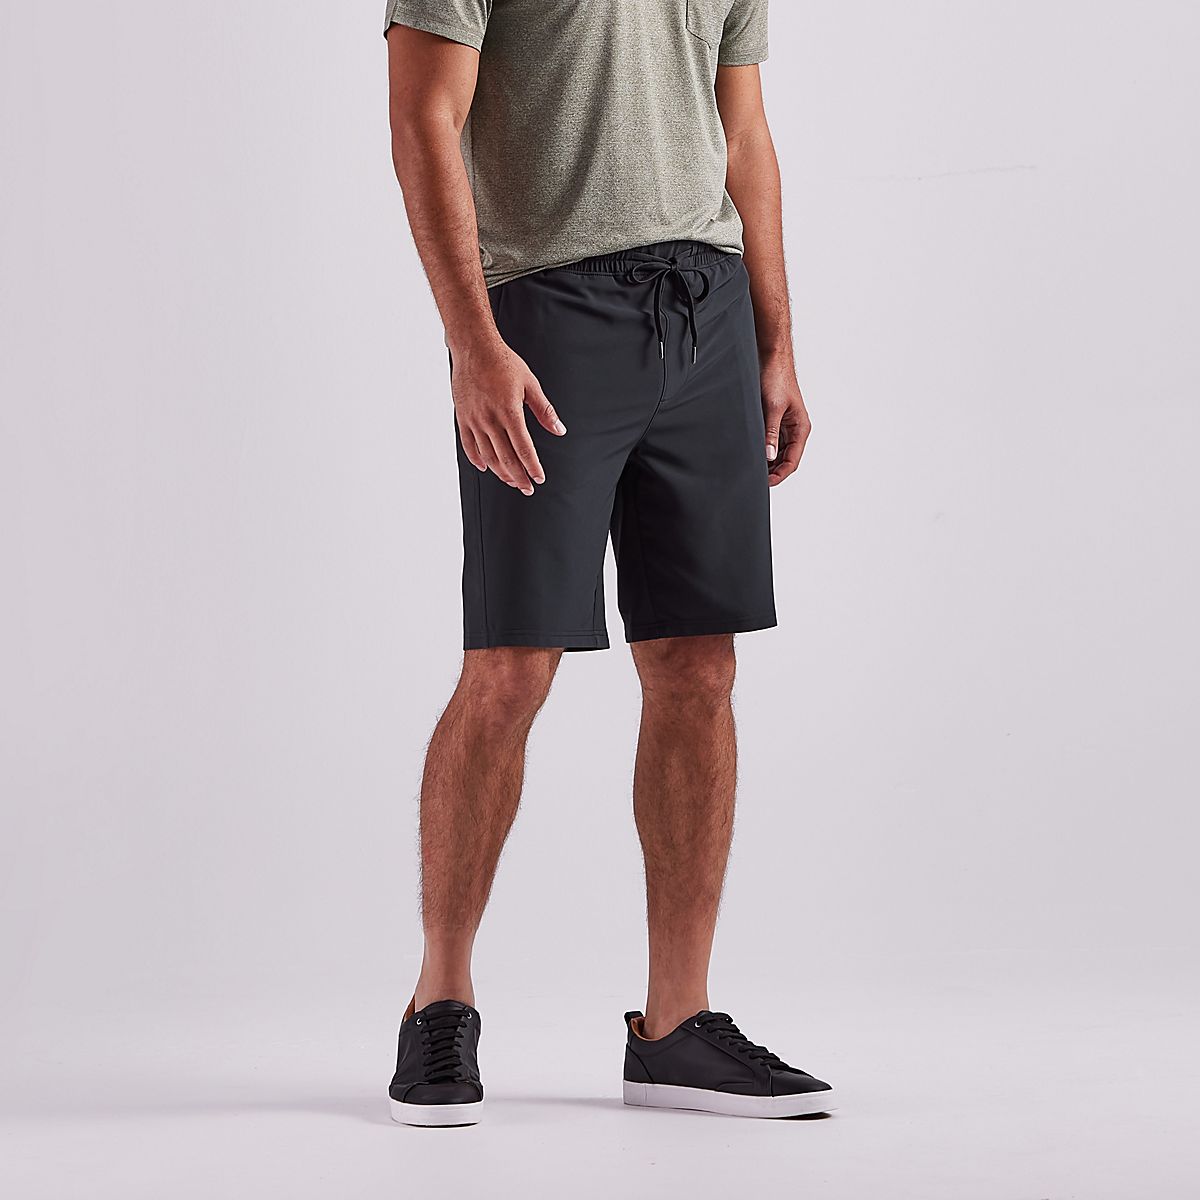 Men's Balance Collection New Heights Shorts